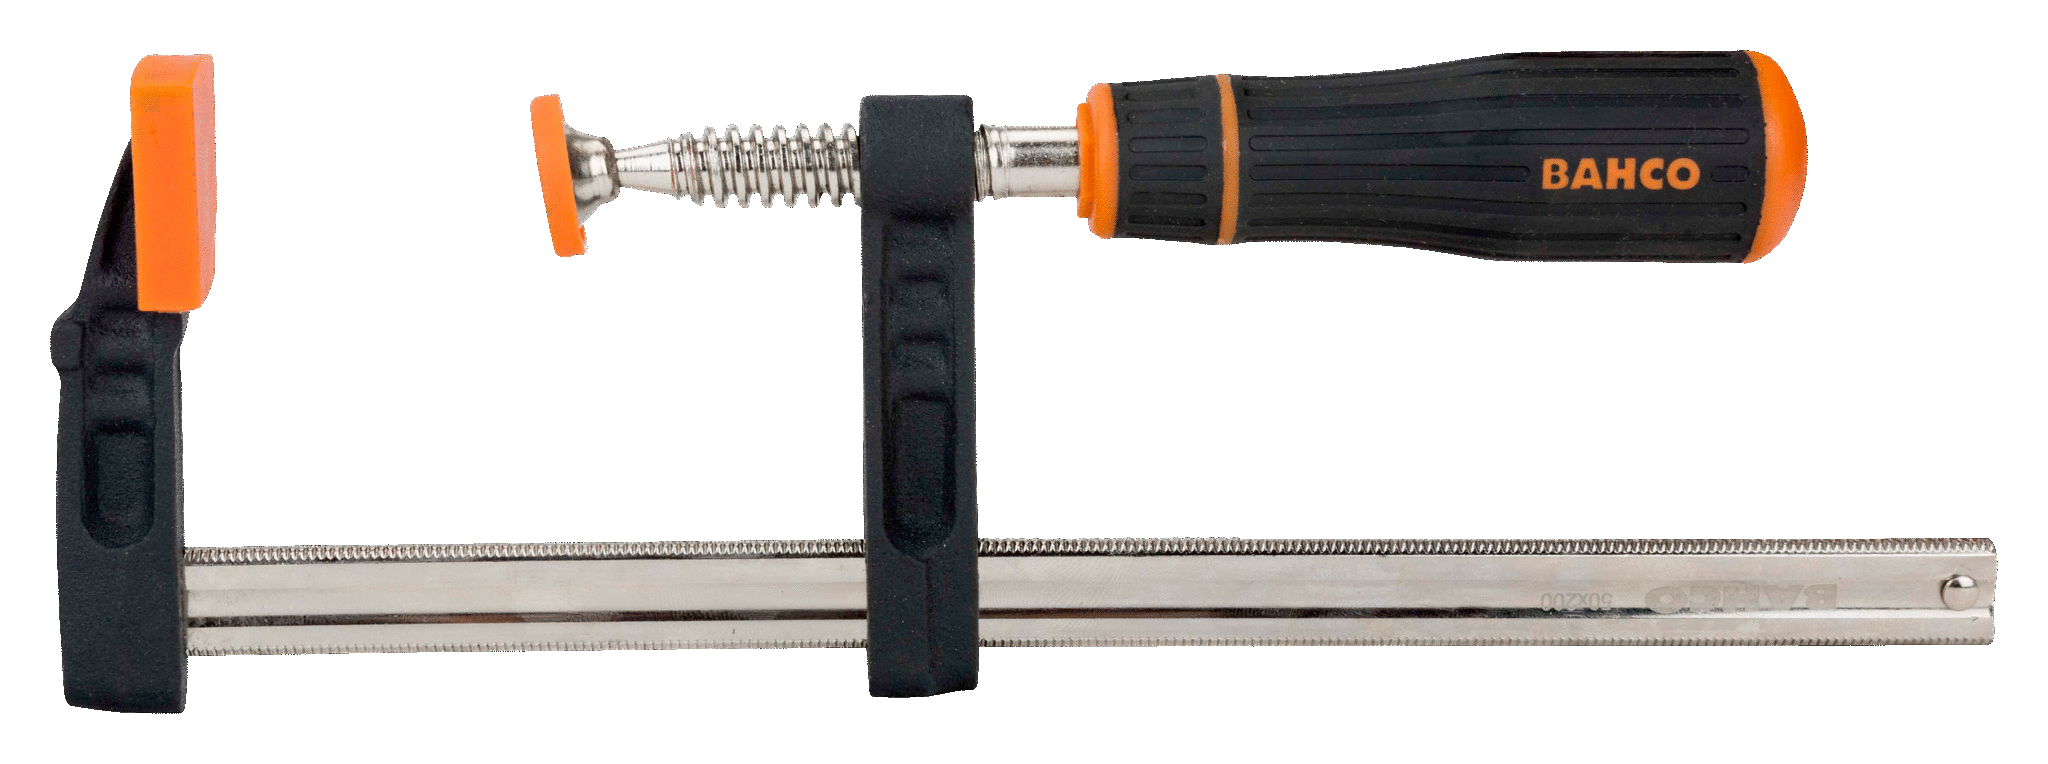 F-Clamps with Rubberised Handle - 420SH-120-250 by Bahco